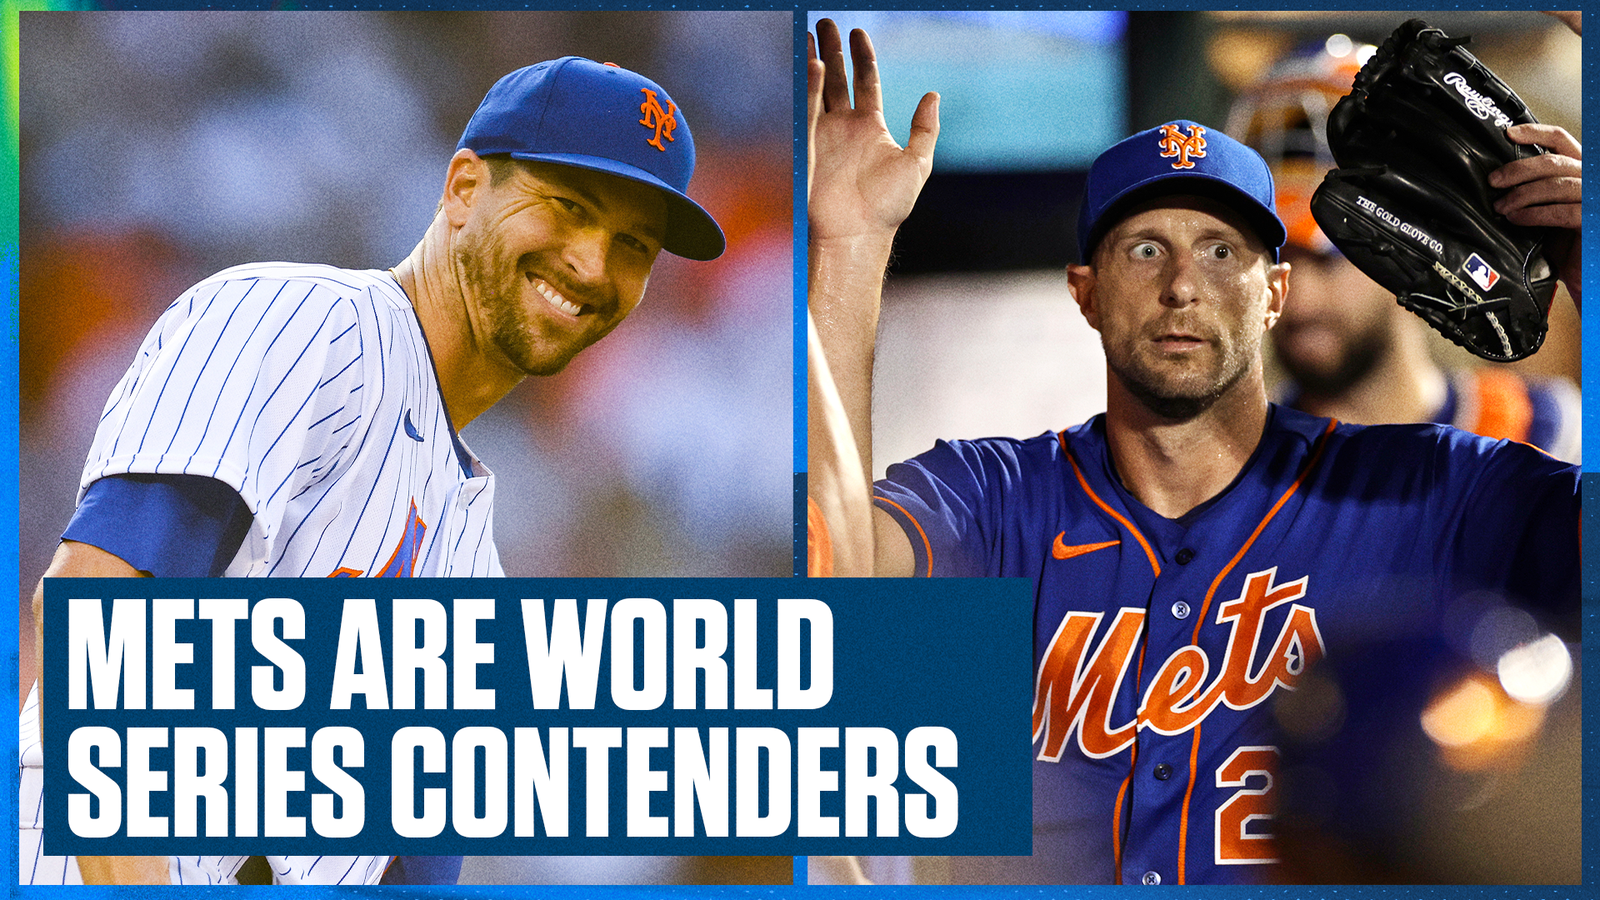 Mets are World Series contenders thanks to pitching